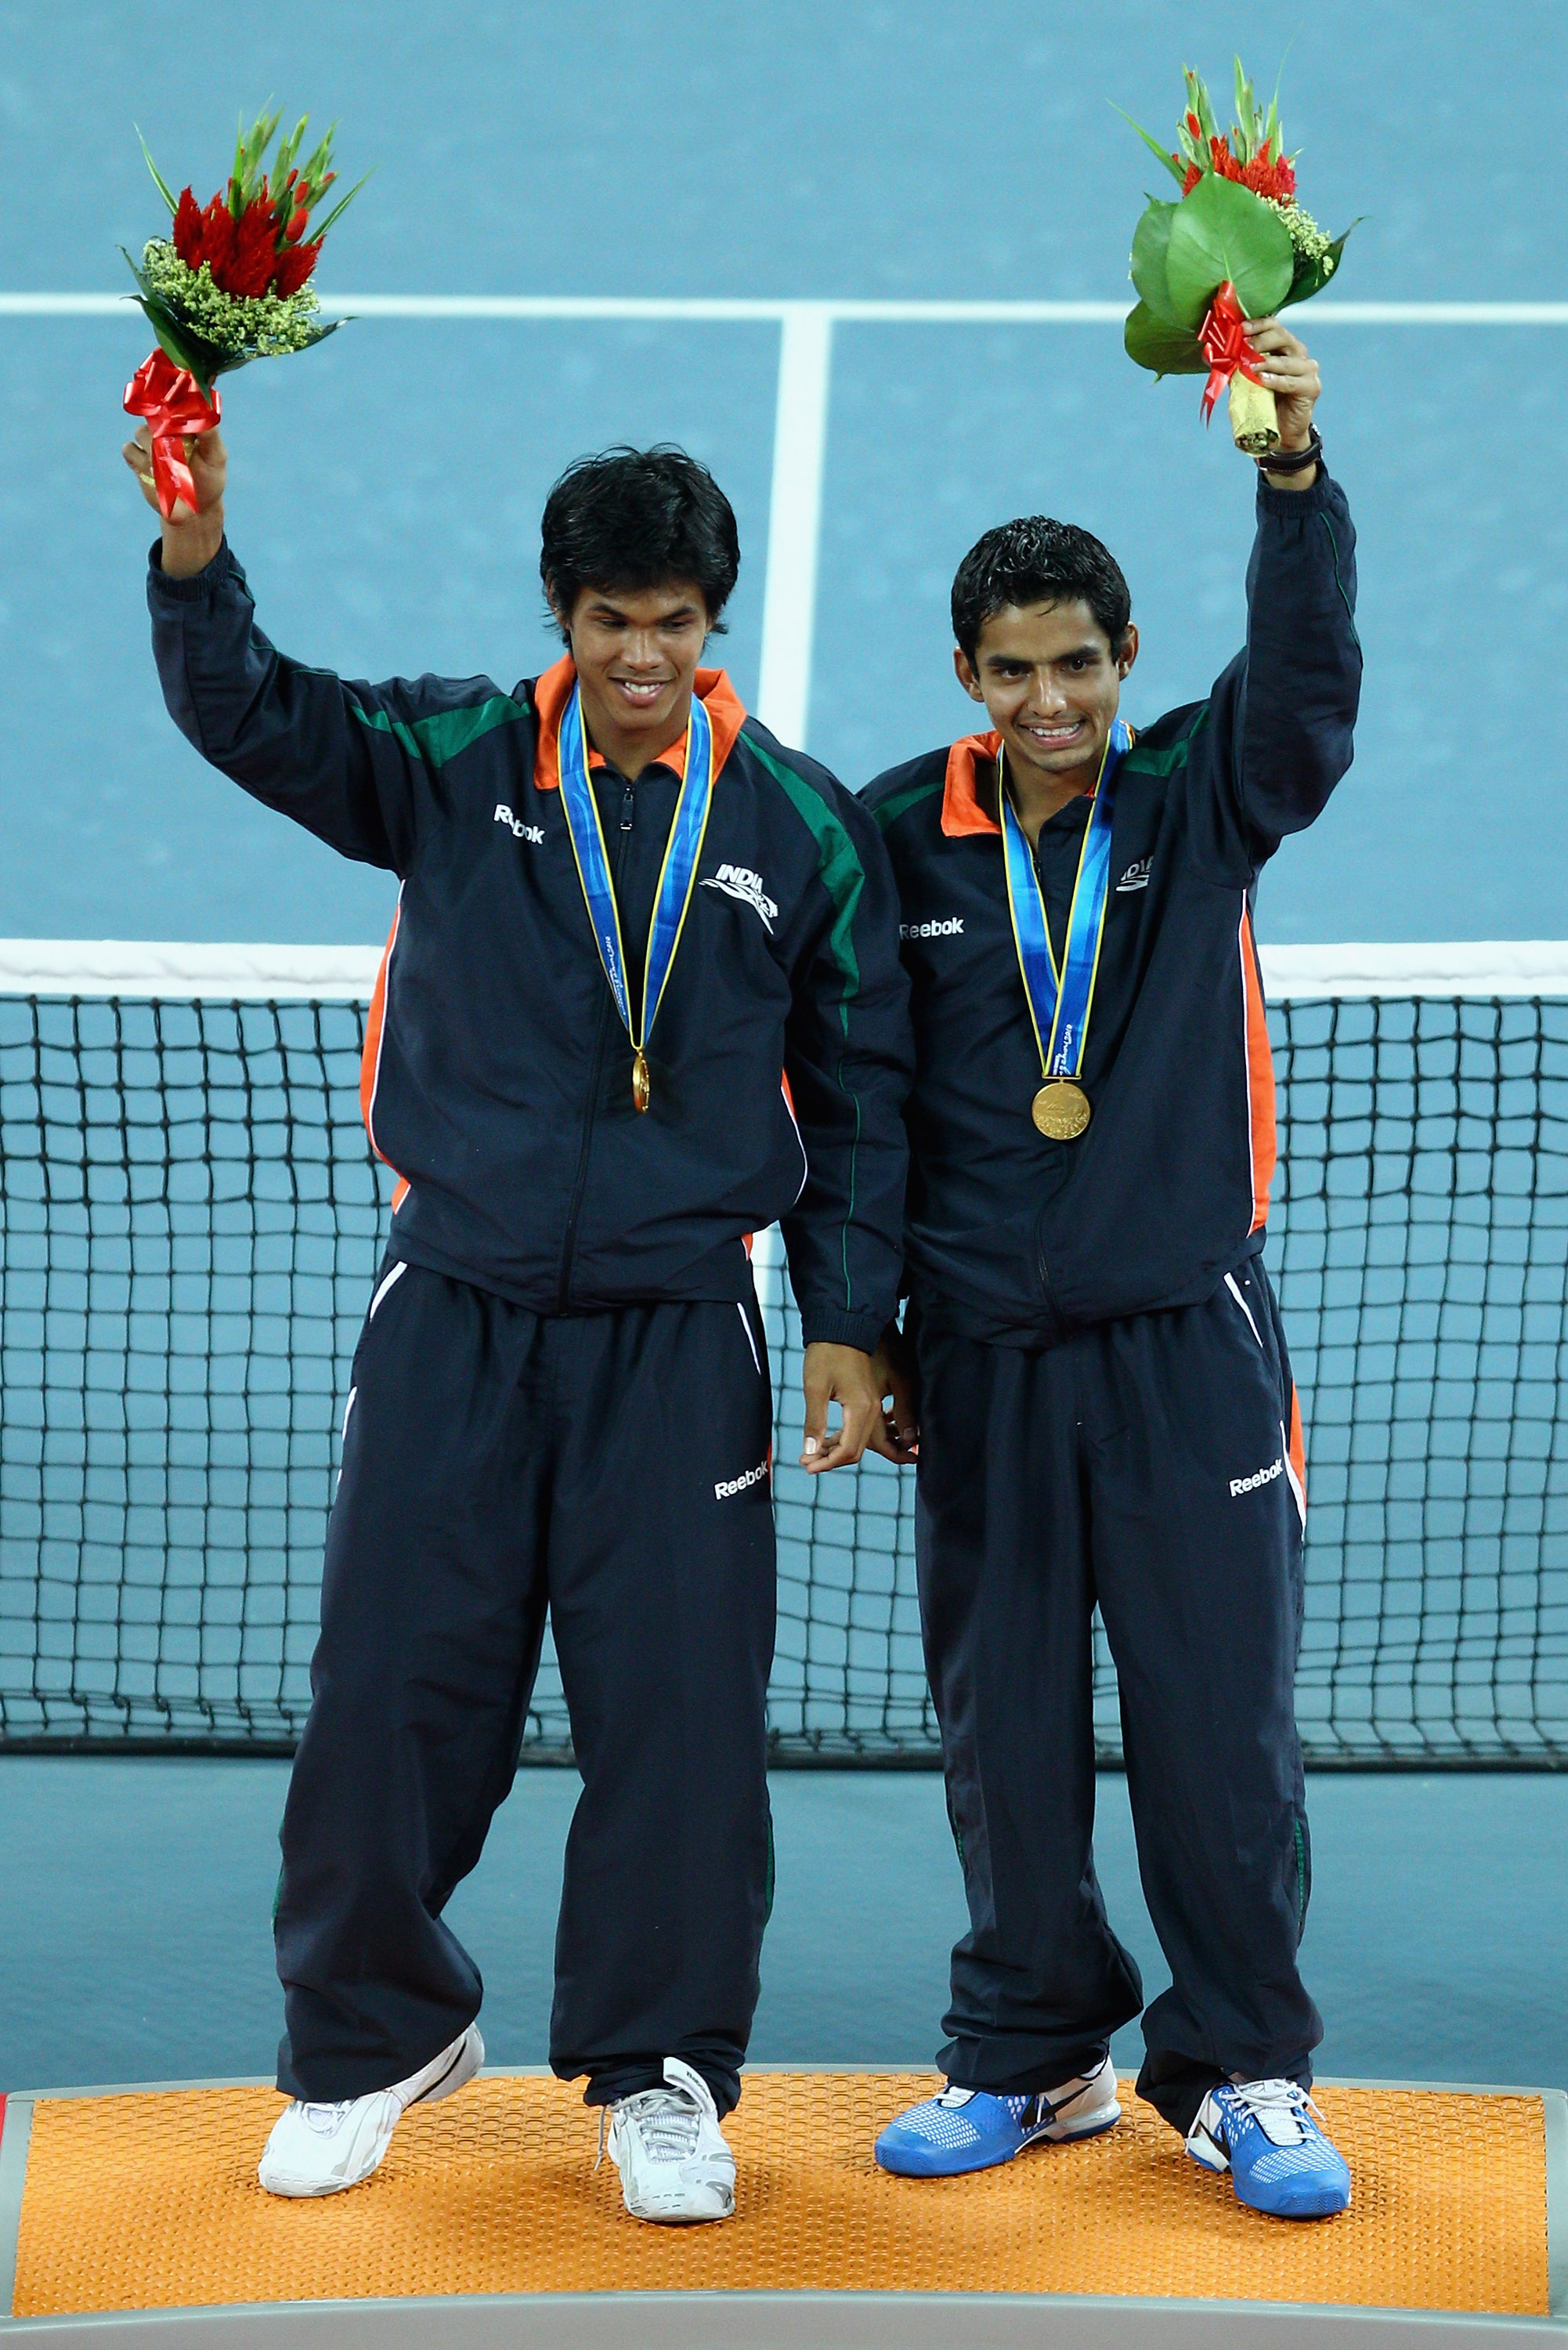 GUANGZHOU, CHINA - NOVEMBER 22:  Devvarman Sk and Sanam Krishan Singh of India celebrate winning the gold medal during the medal ceremony of the Men's Doubles Final tennis match at Aoti Tennis Centre during day ten of the 16th Asian Games Guangzhou 2010 o